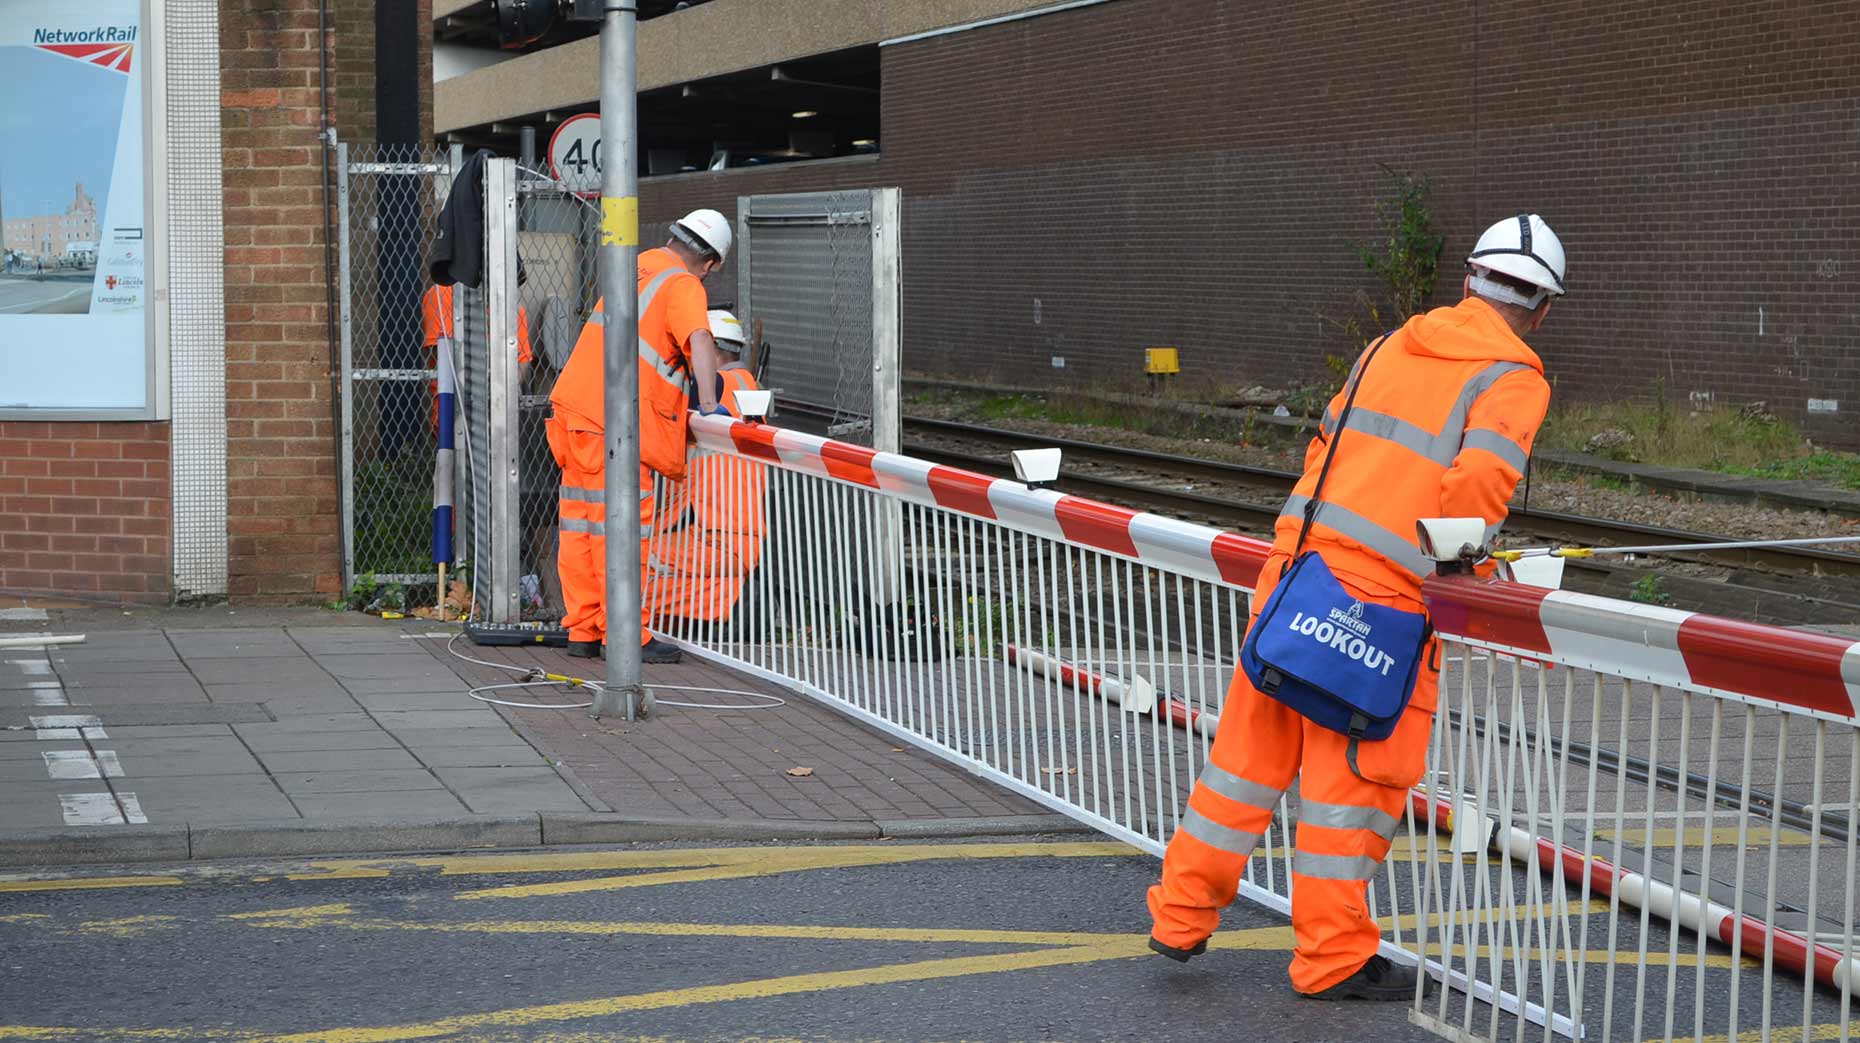 Network Rail were on scene to carry out repair works. 